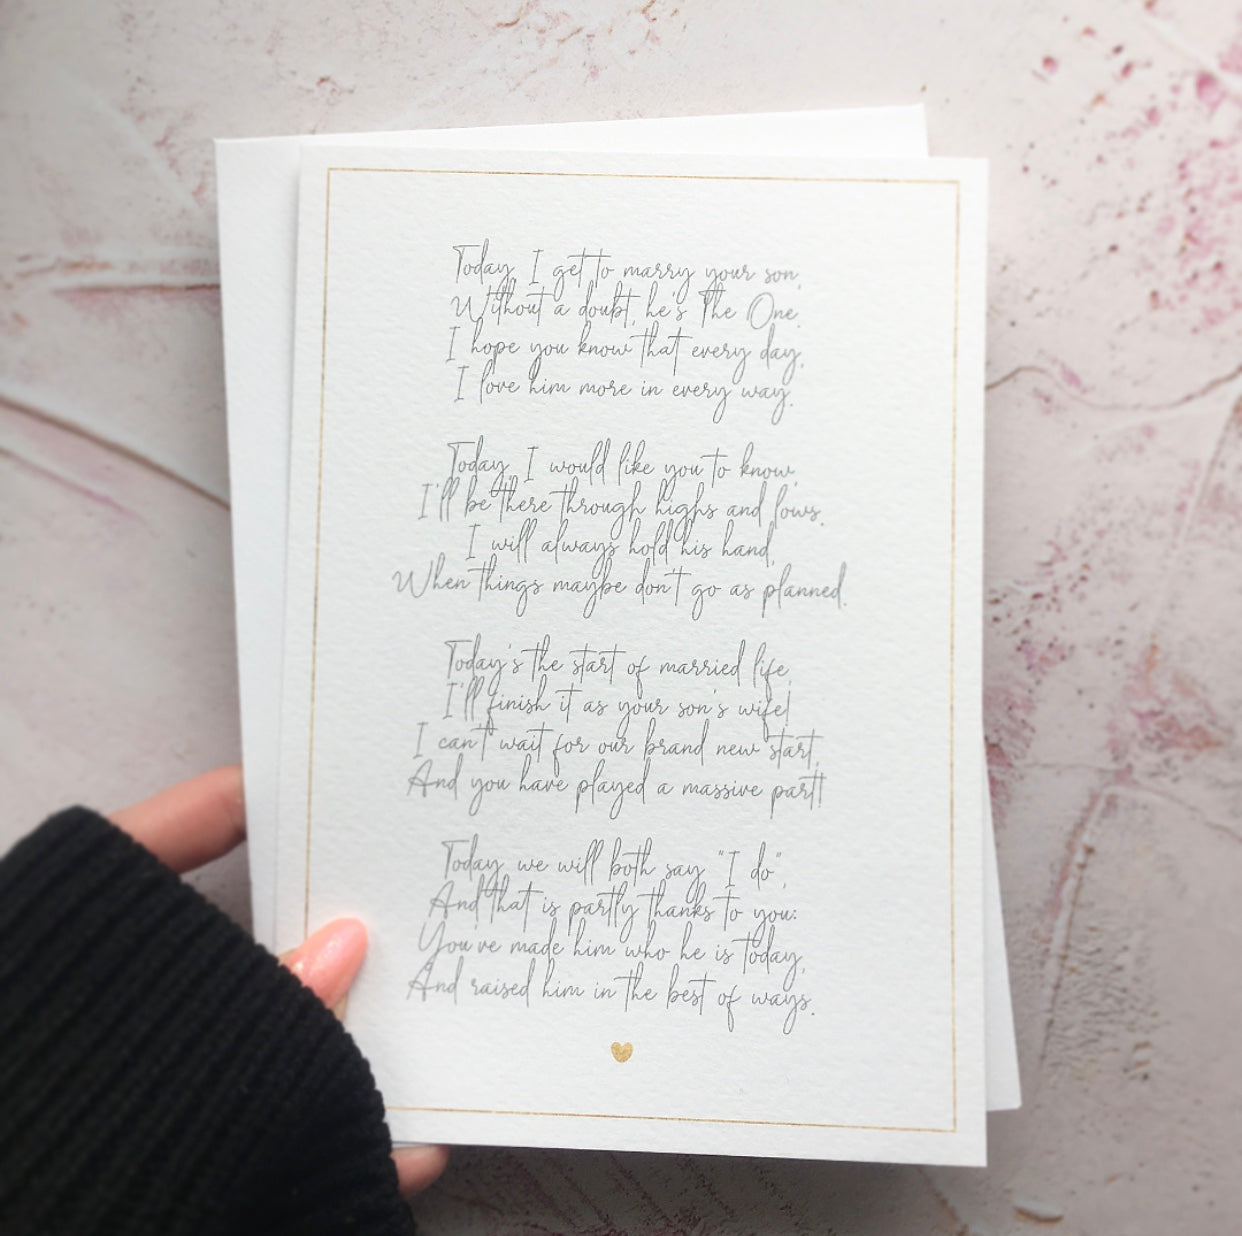 'Today, I will marry your son' - Printed Poem to Gift Future Mother- or Father-in-Law